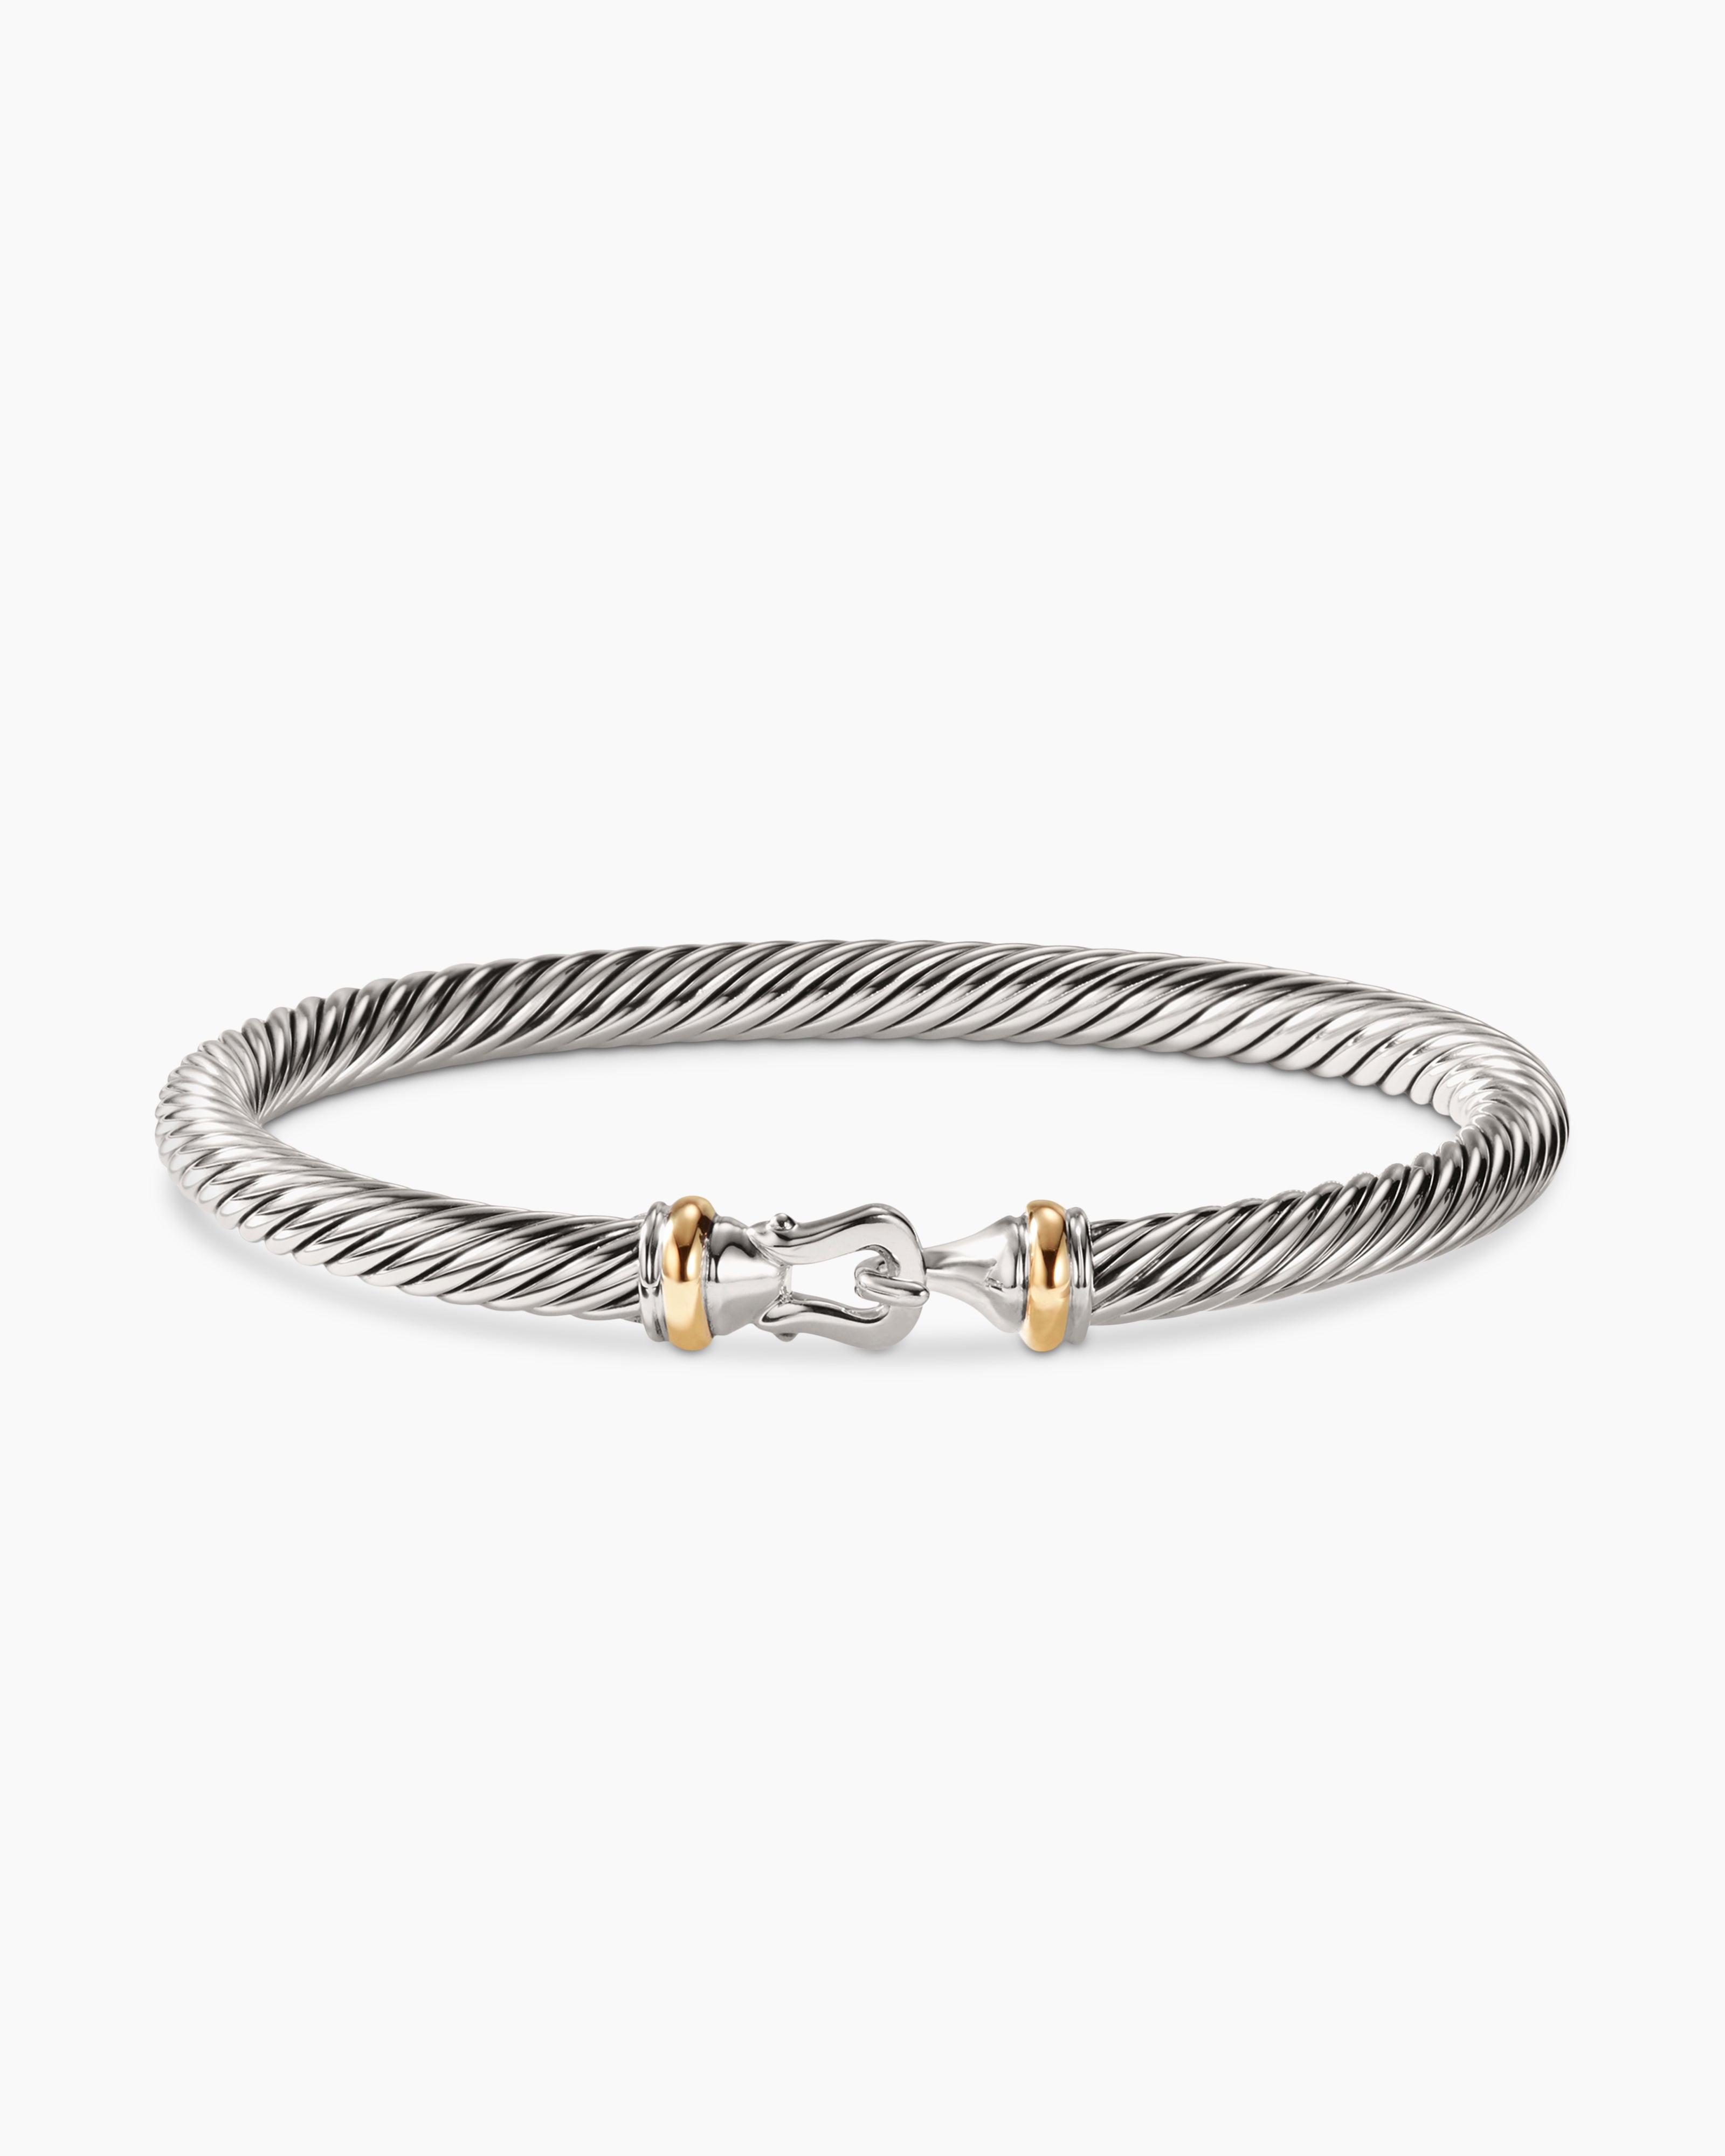 Buy quality 925 Sterling Silver Classic Bracelet in Ahmedabad